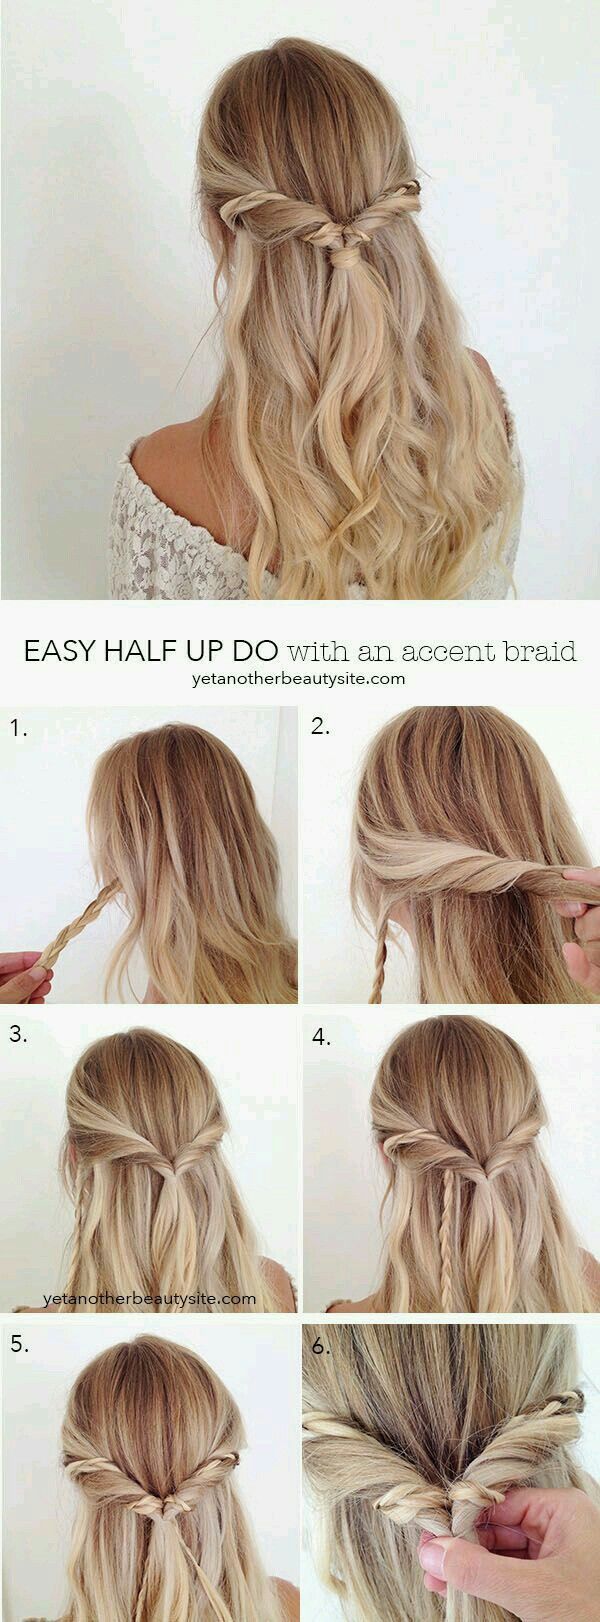 15 Gorgeous and Easy Beach Hairstyles to rock this summer